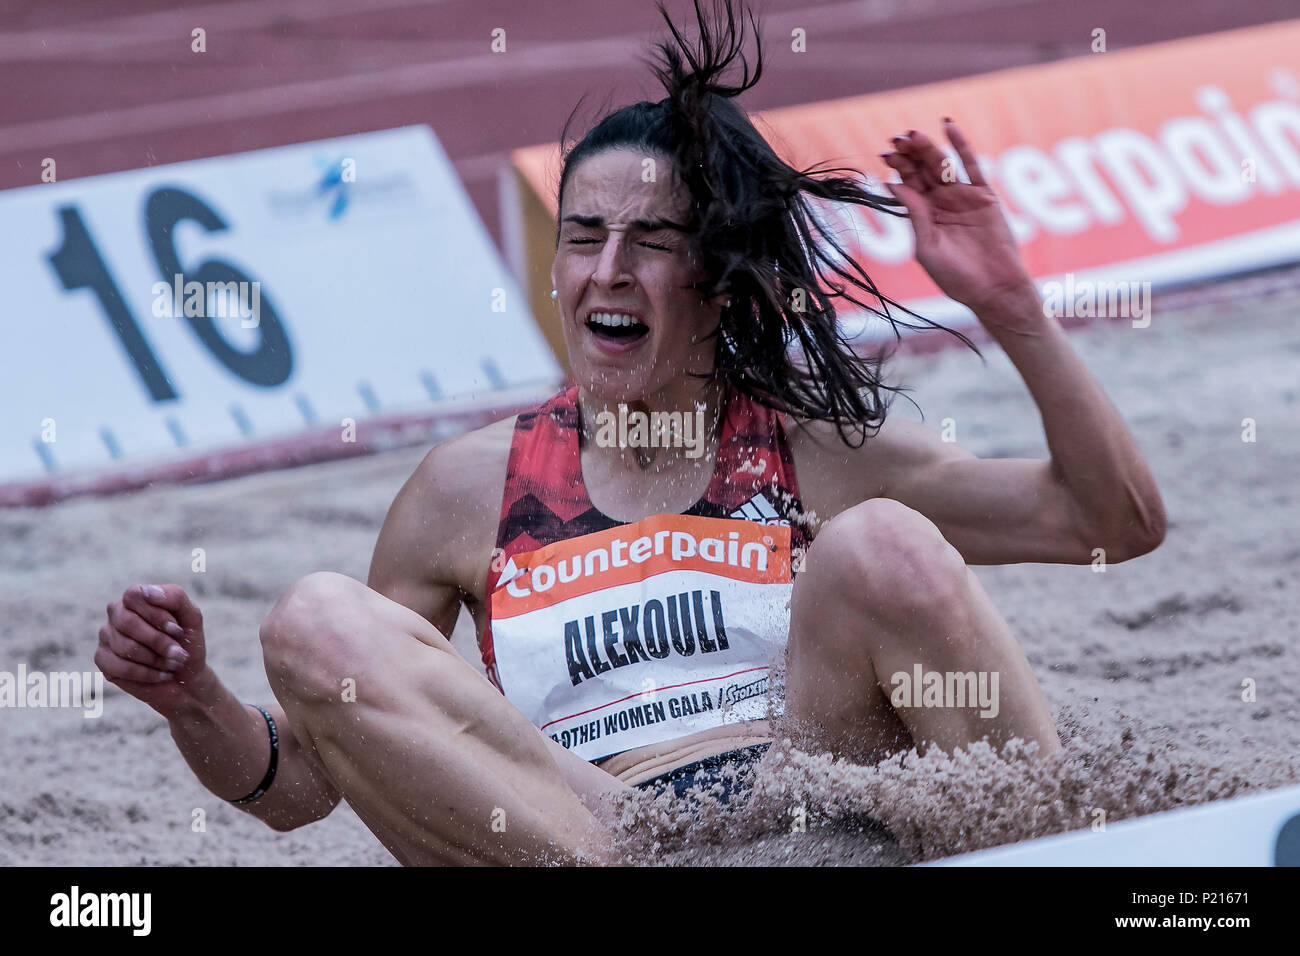 Athens, Greece. 13th June, 2018. Haido Alexouli of Greece competes in Long Jump at the Filothei Women Gala in Athens, Greece, June 13, 2018. Credit: Panagiotis Moschandreou/Xinhua/Alamy Live News Stock Photo